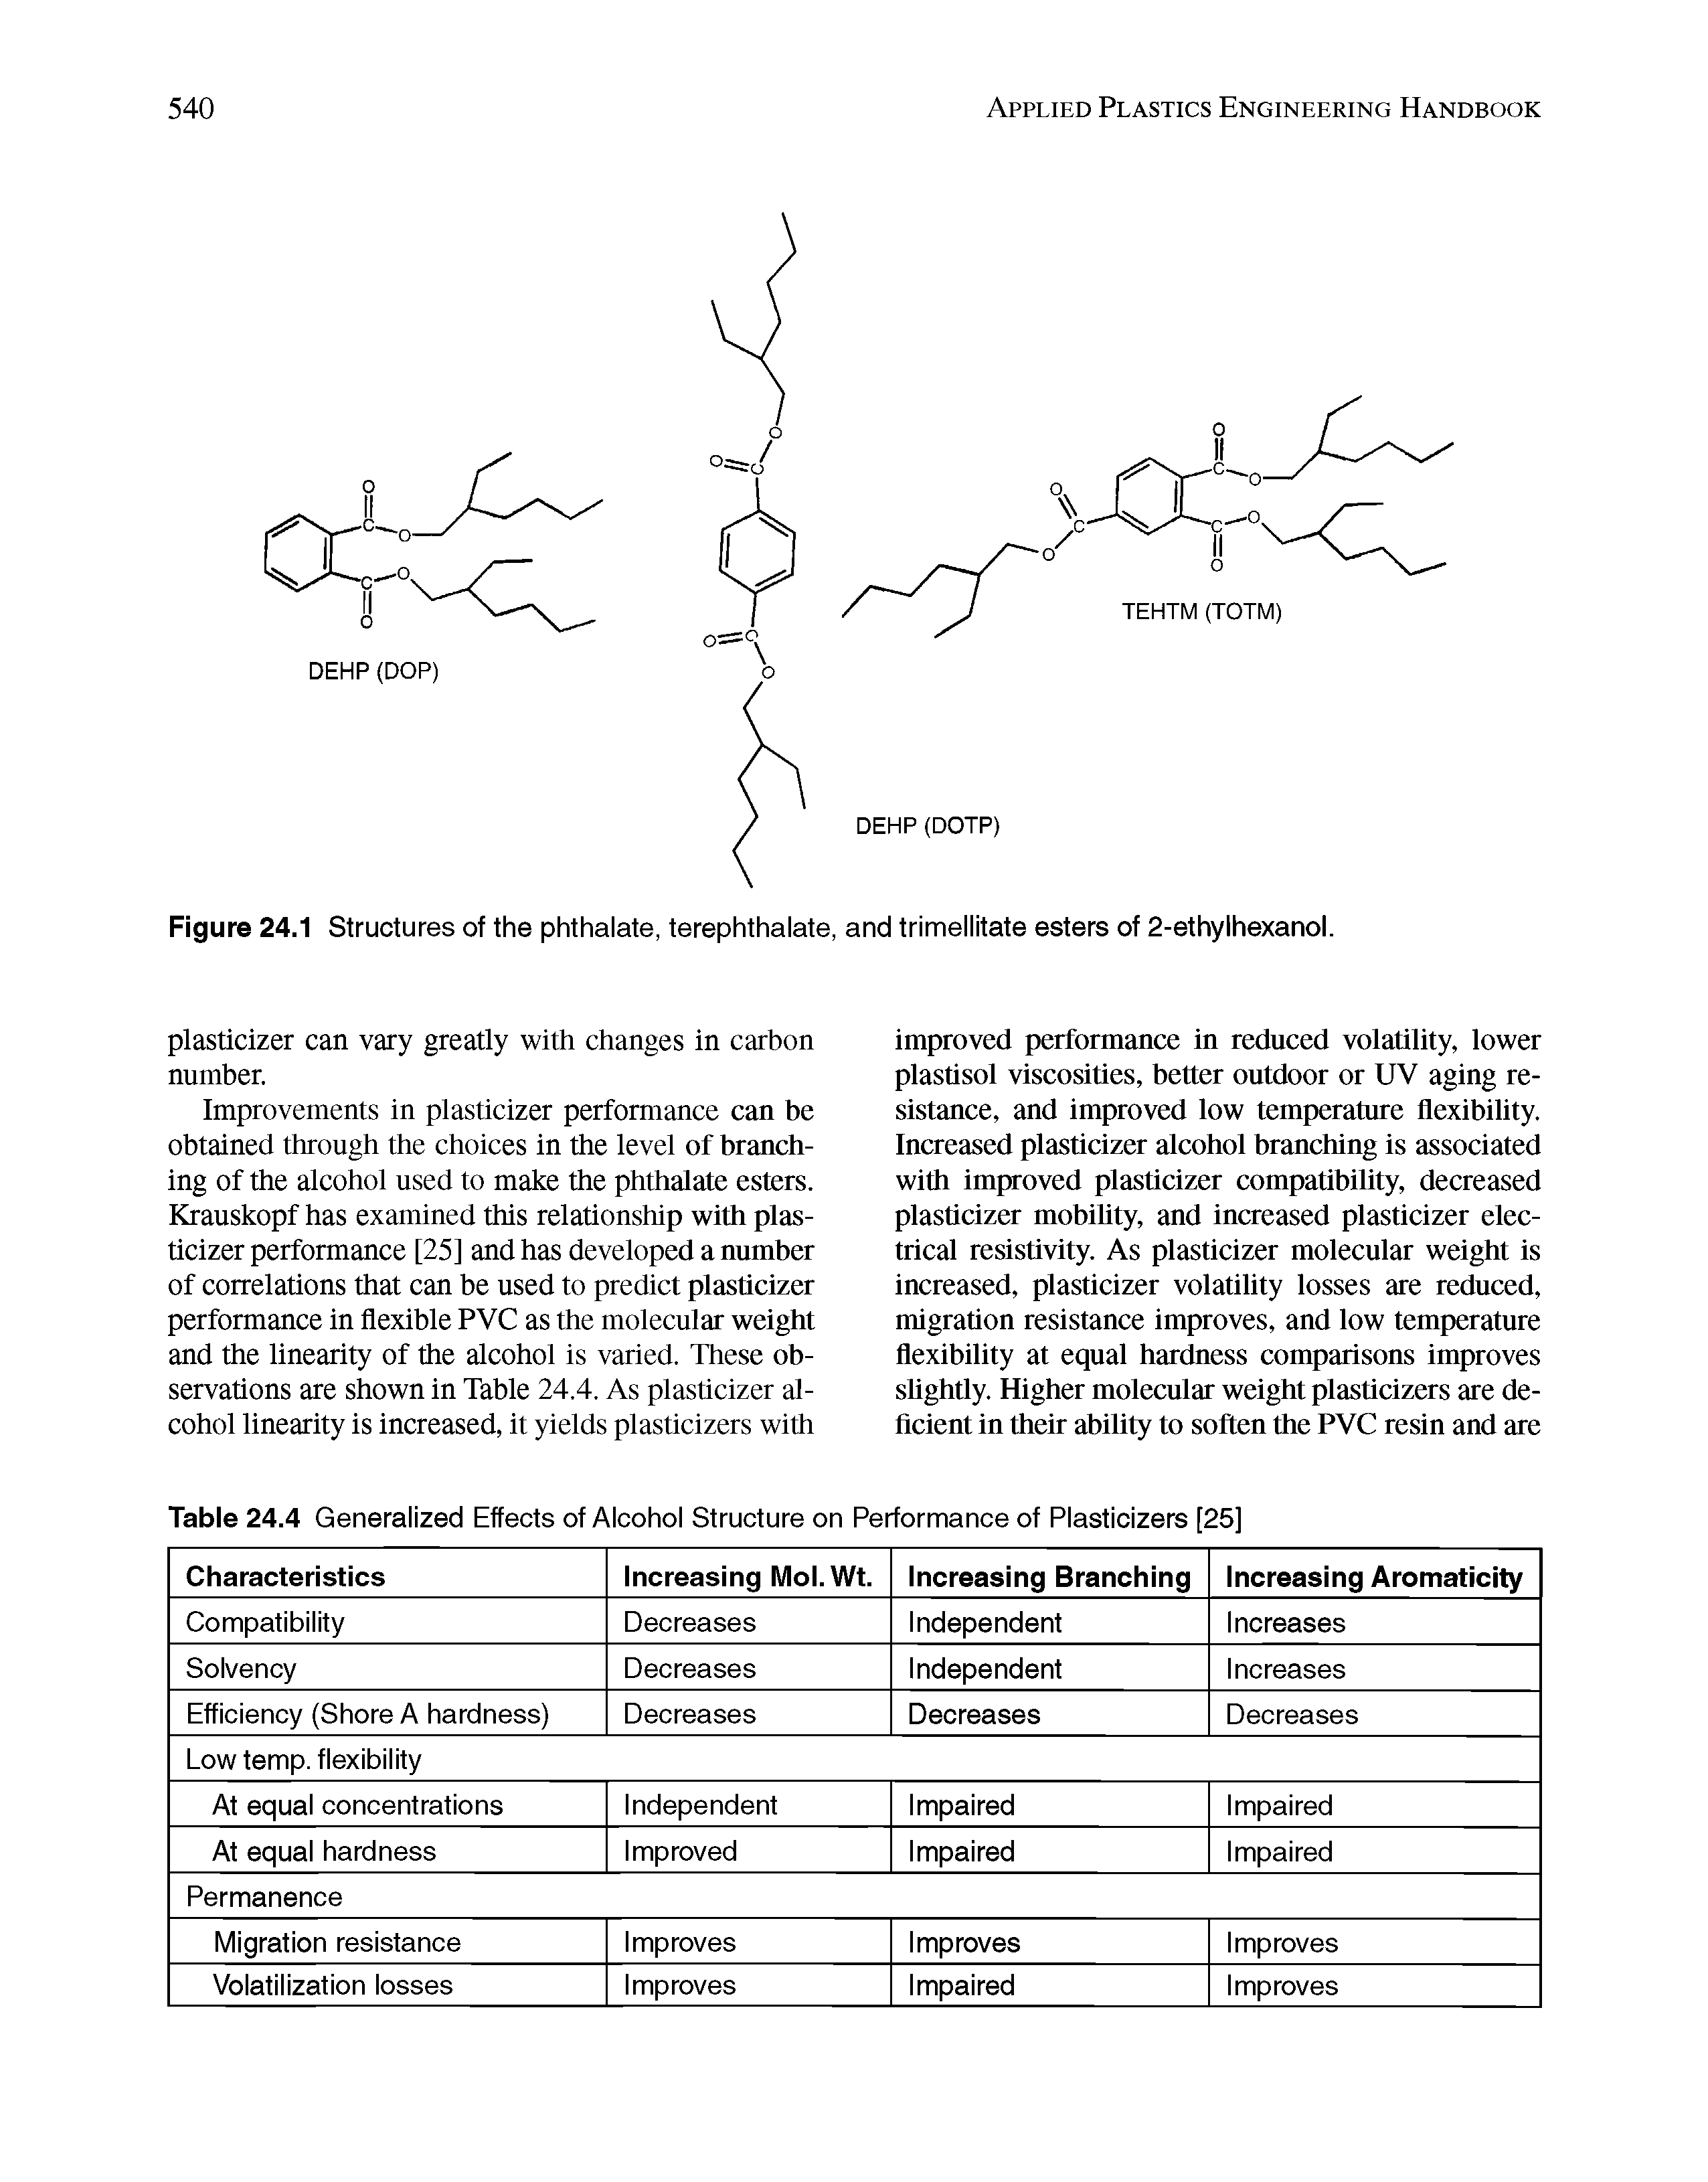 Figure 24.1 Structures of the phthalate, terephthalate, and trimellitate esters of 2-ethylhexanol.